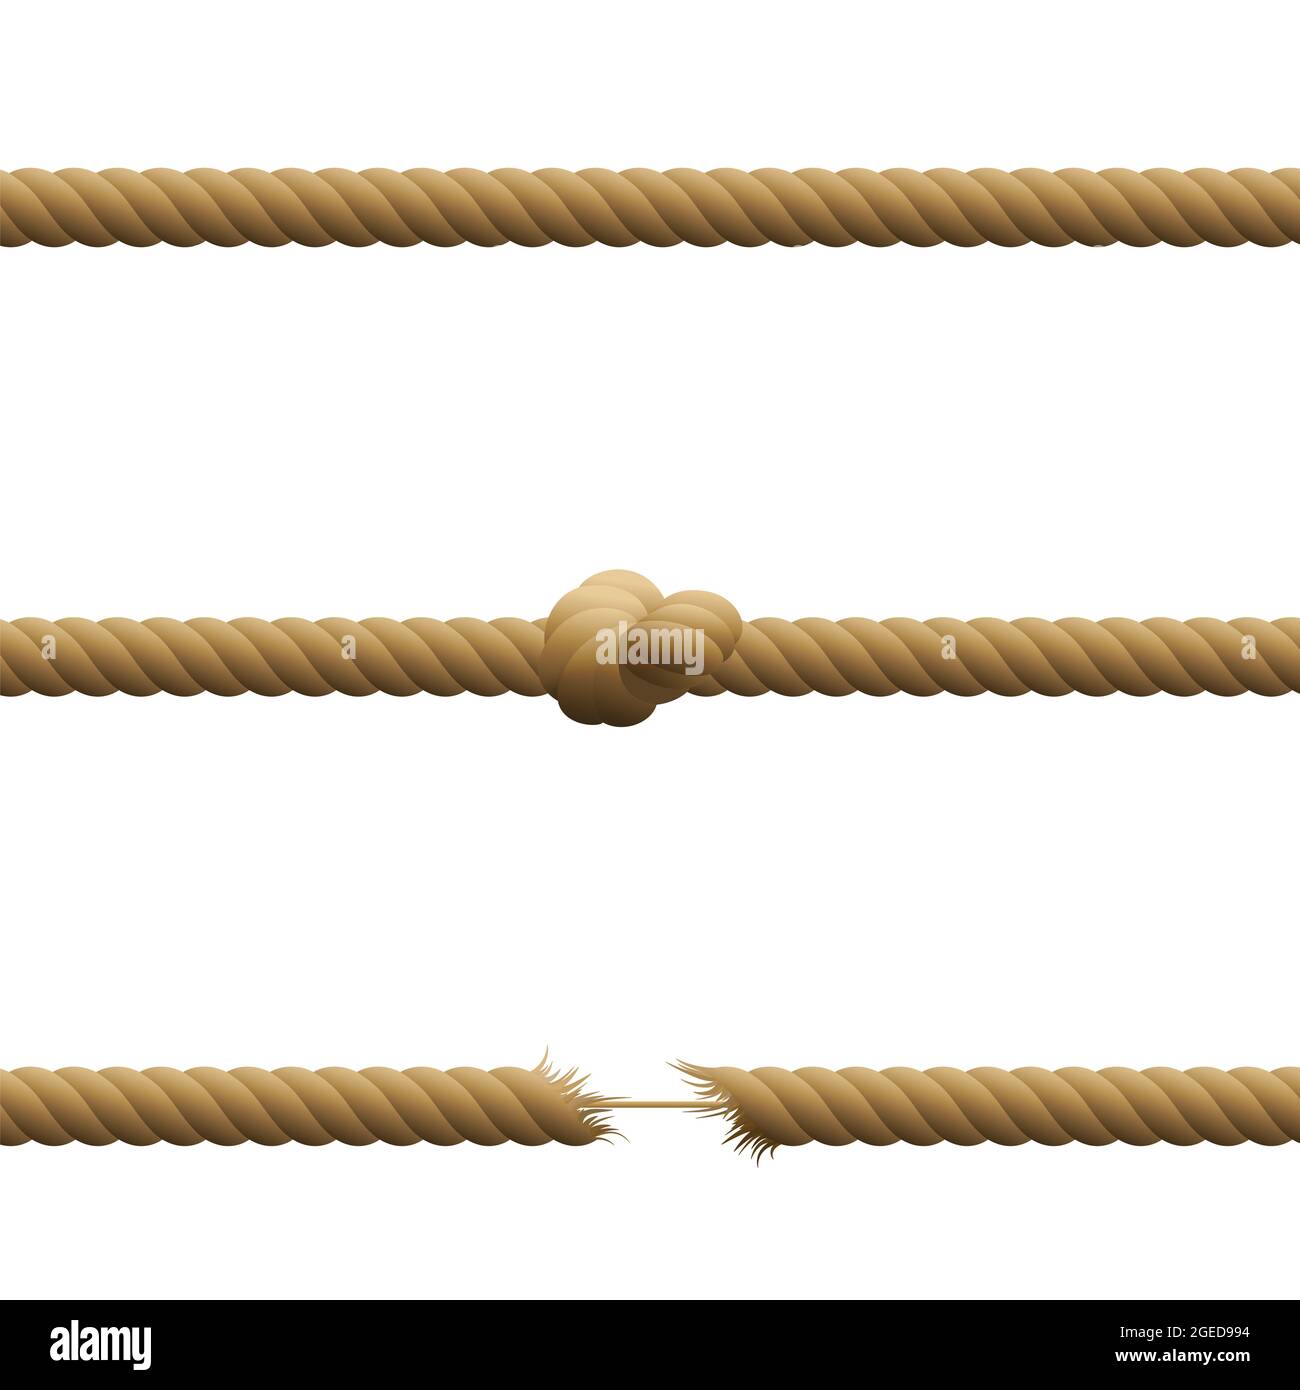 https://c8.alamy.com/comp/2GED994/ropes-intact-with-knot-and-hanging-by-a-thread-with-frayed-tensioned-ends-held-together-by-a-thin-string-illustration-on-white-background-2GED994.jpg